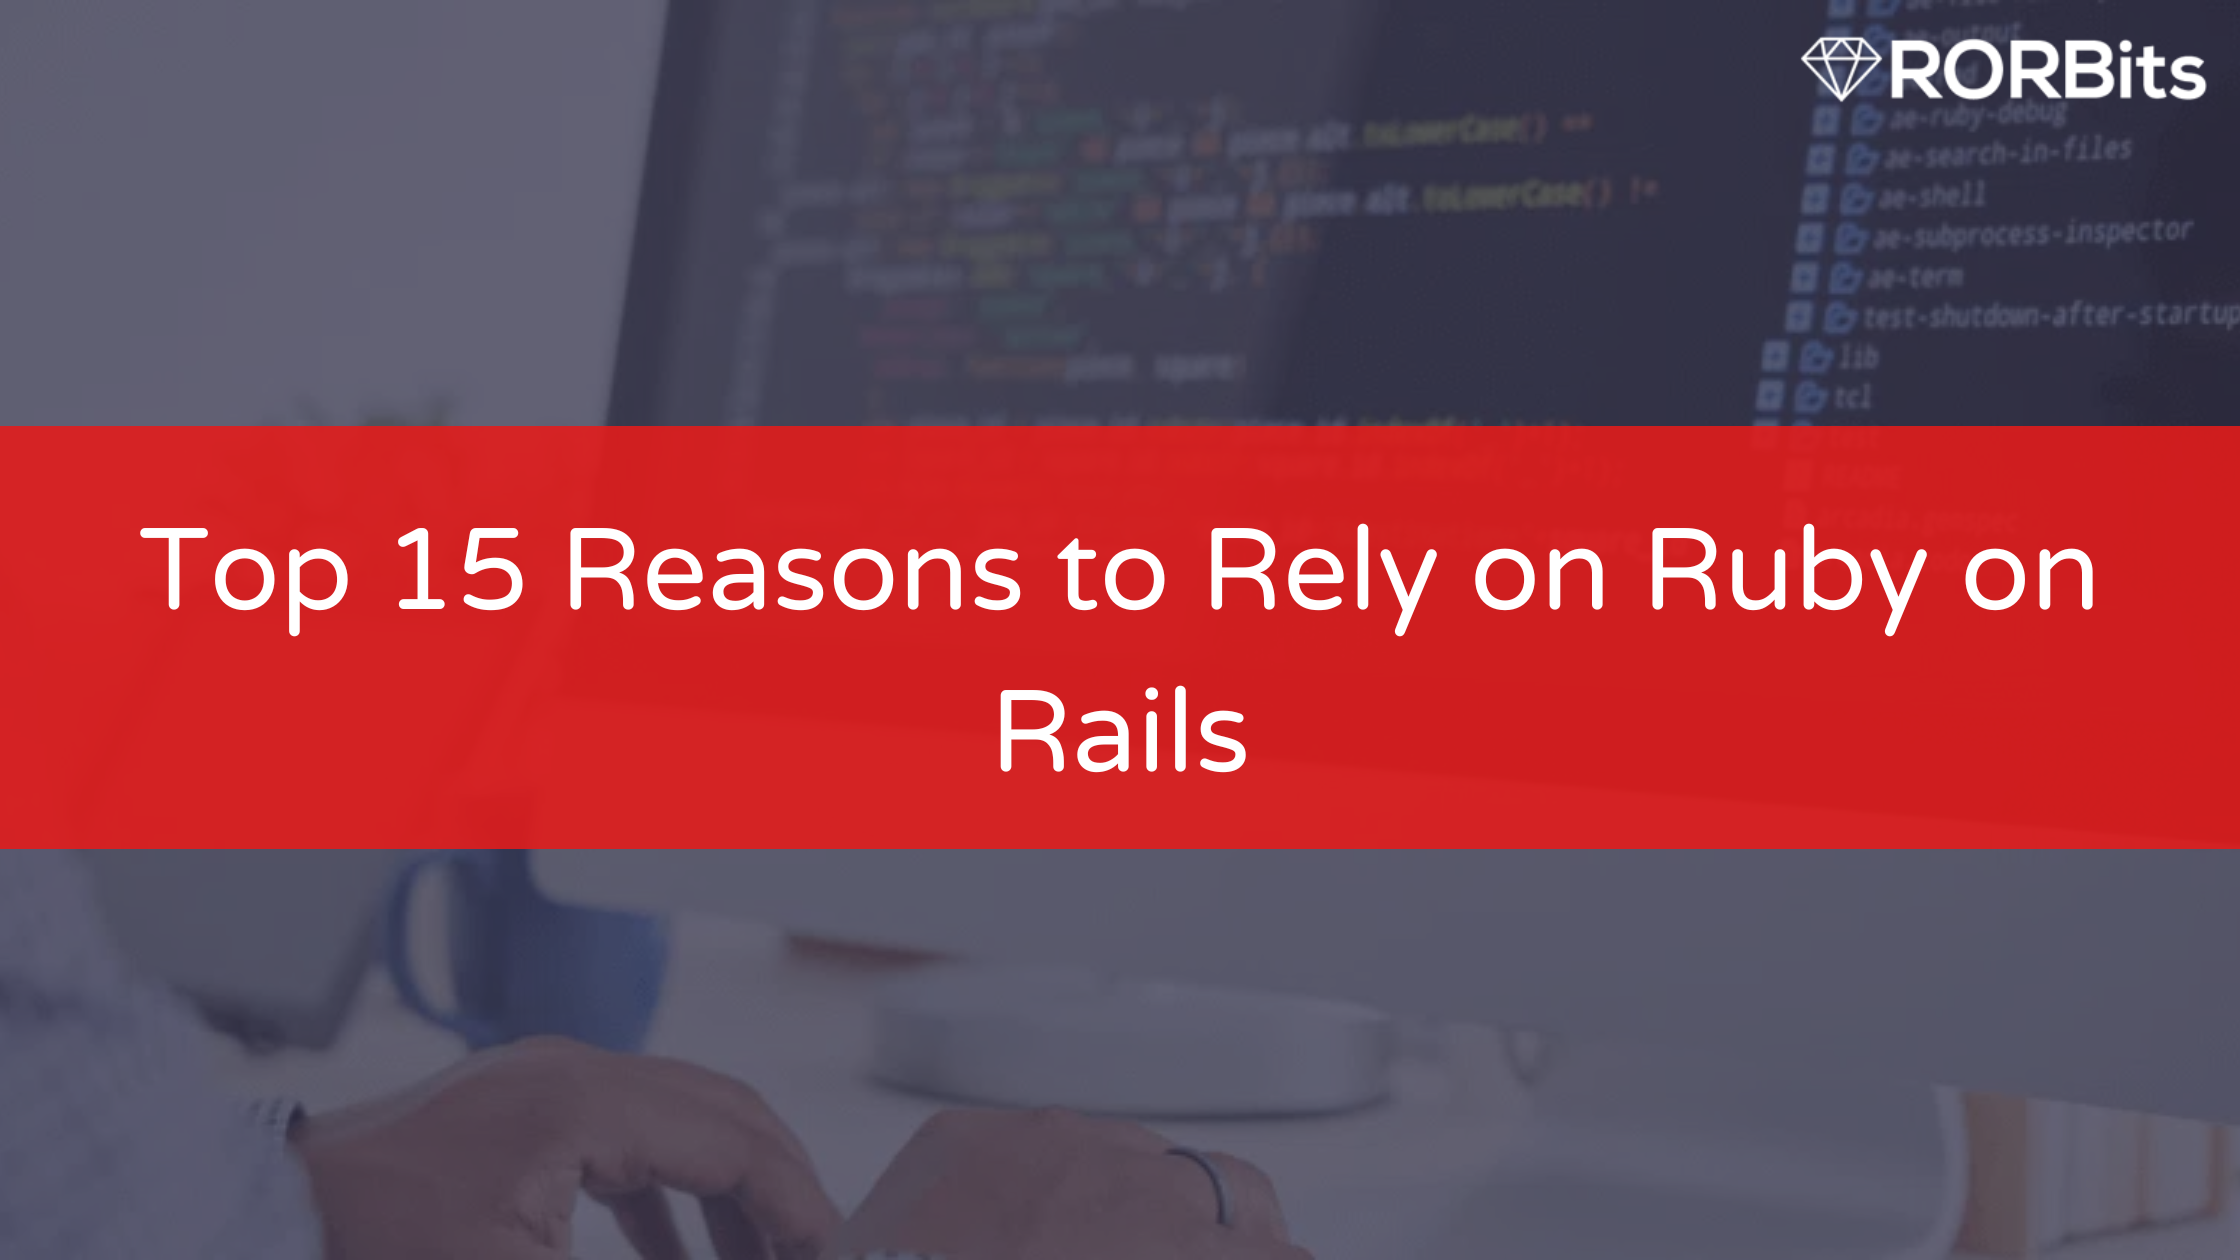 Top 15 Reasons to Rely on Ruby on Rails